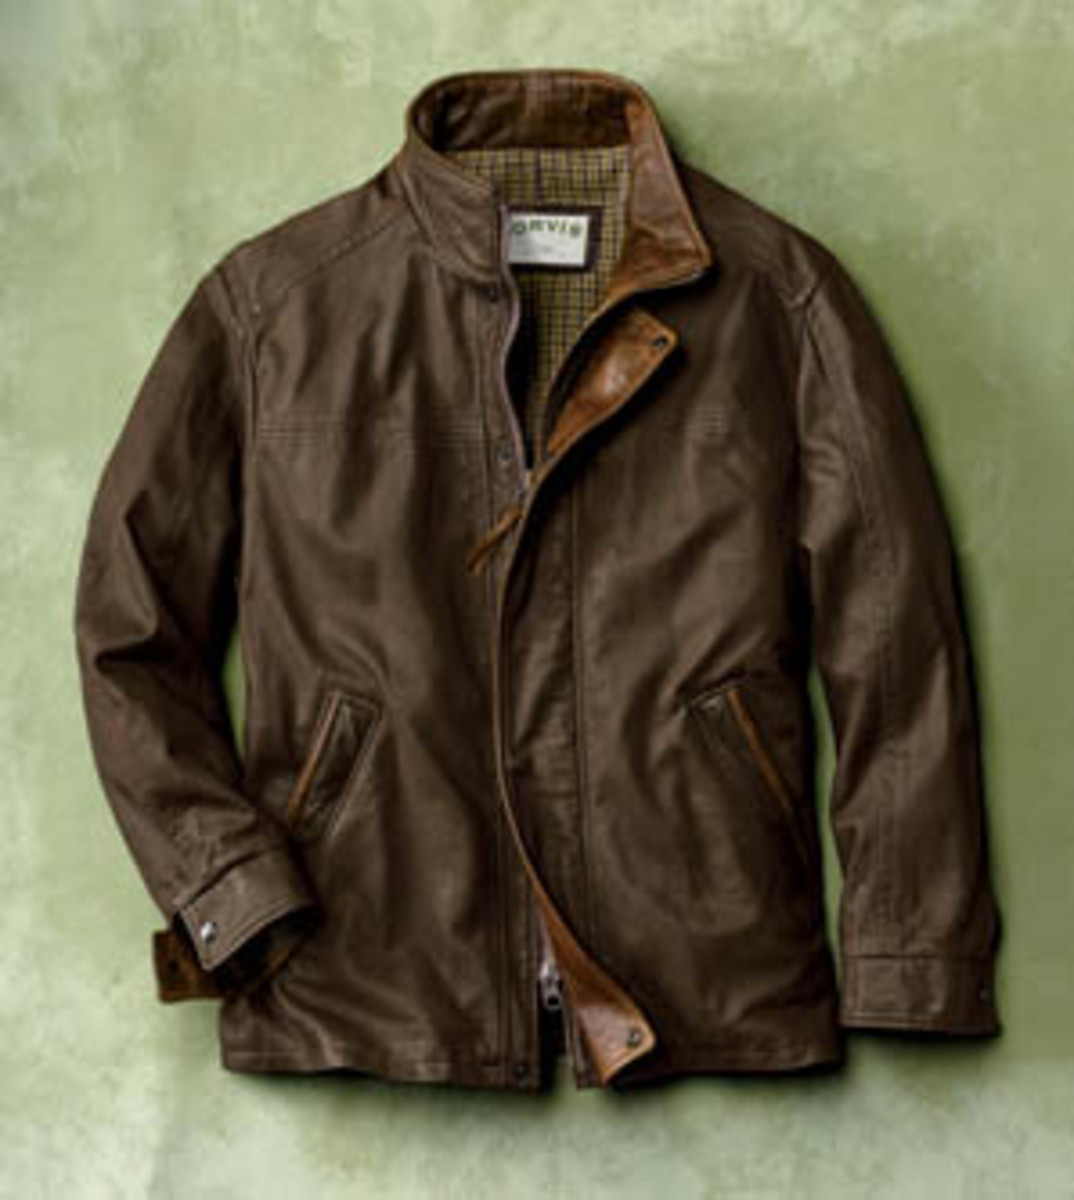 3 Leather Field Jackets Fit for The 